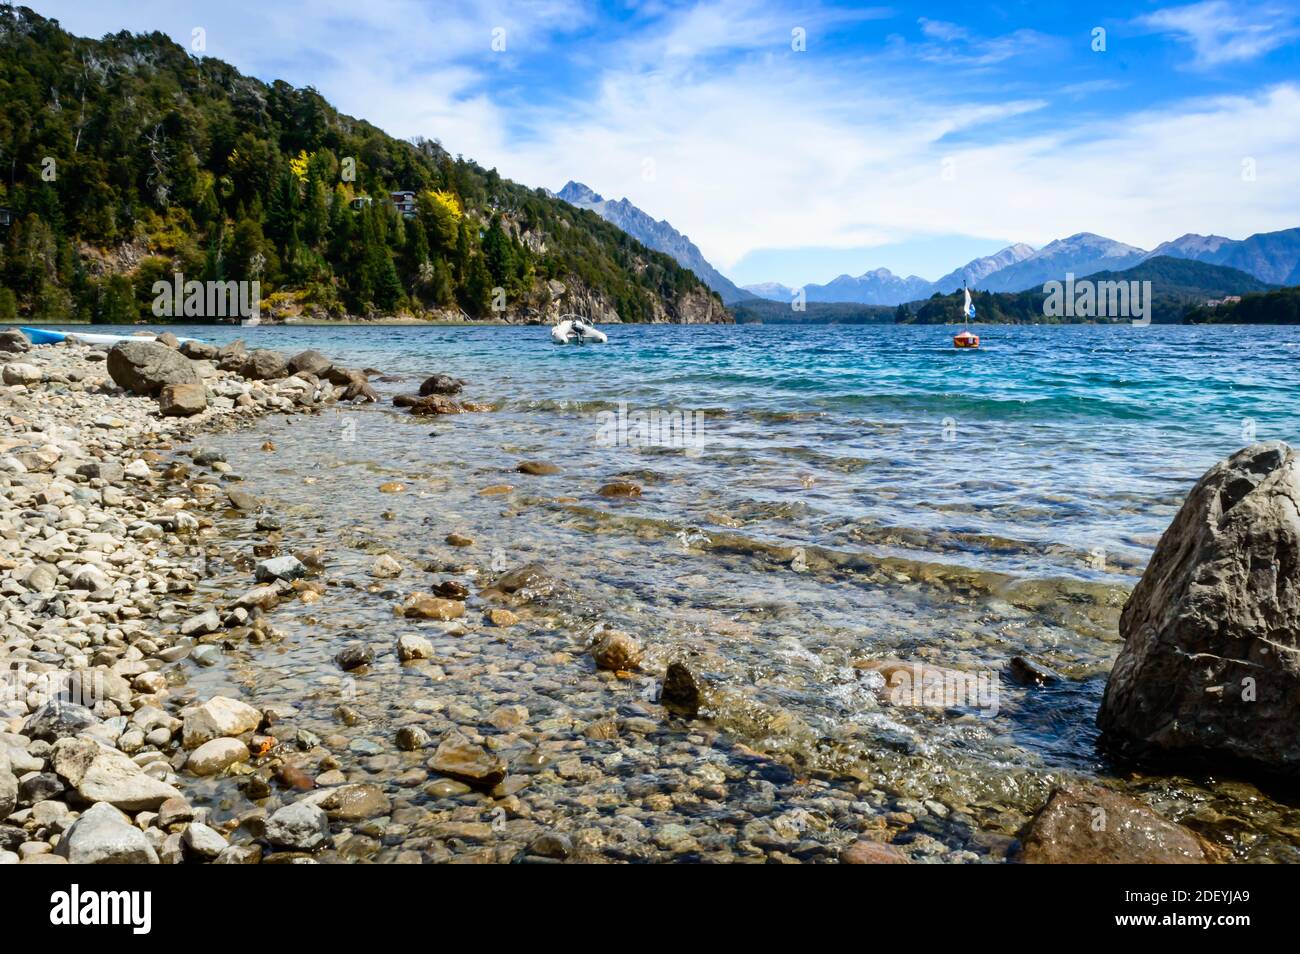 Beautiful lake of bariloche with rocks, pine trees, water, mountains Stock Photo